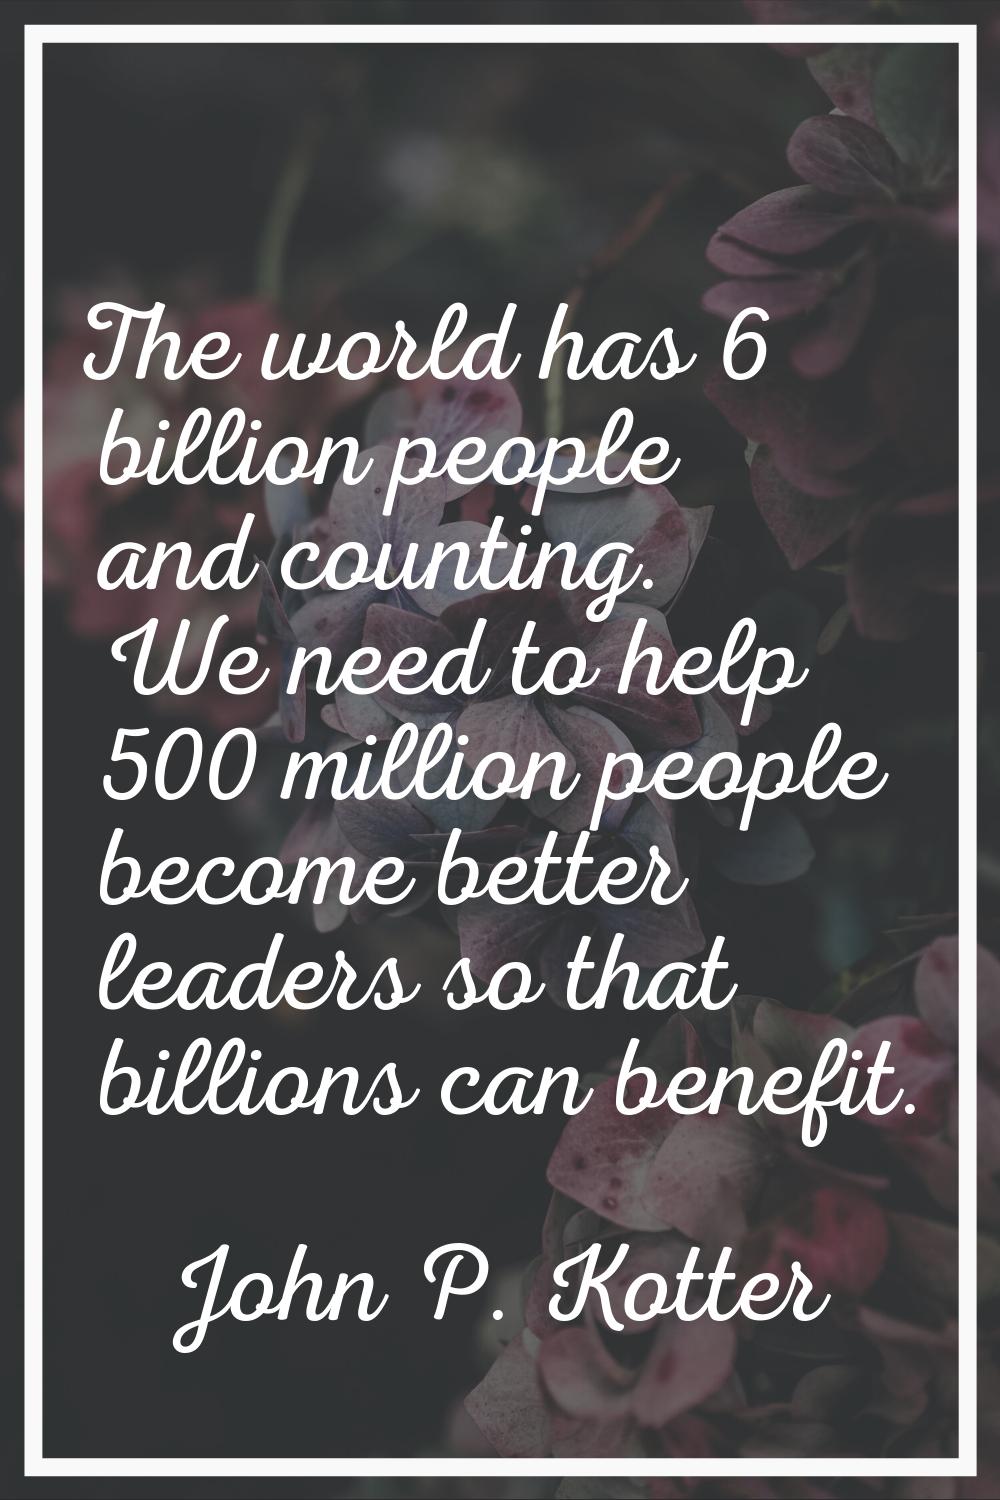 The world has 6 billion people and counting. We need to help 500 million people become better leade